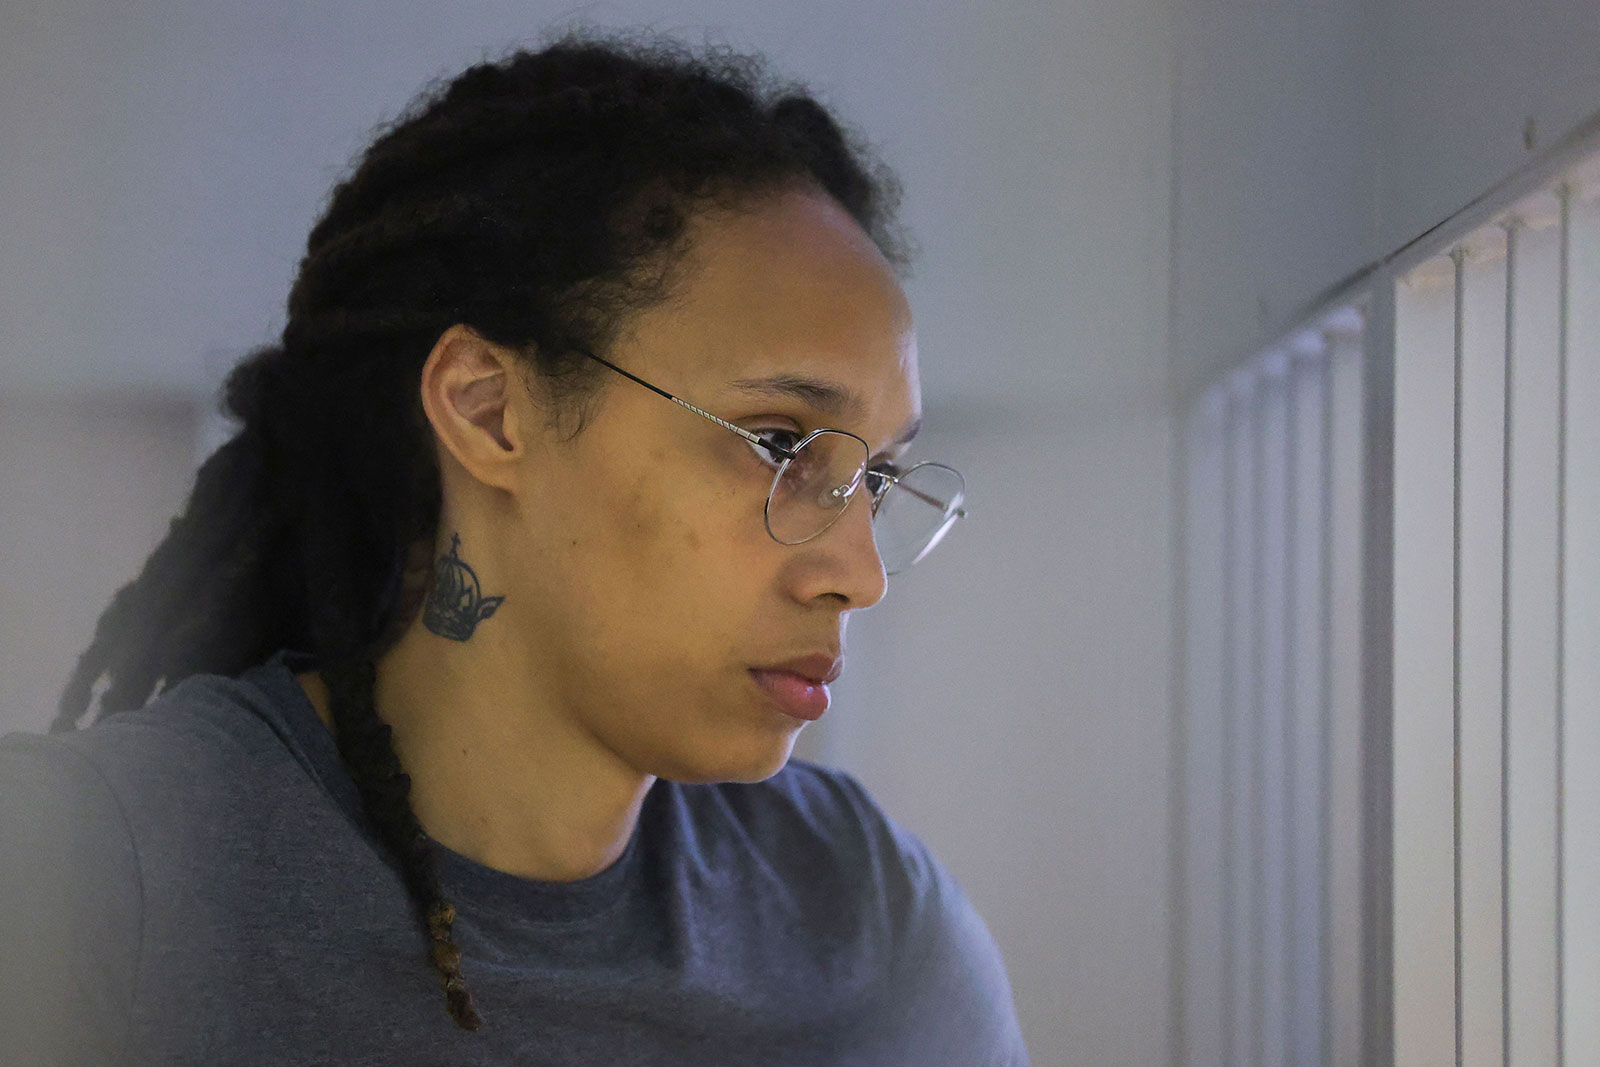 Brittney Griner waits during a hearing in Khimki, Russia, in August.